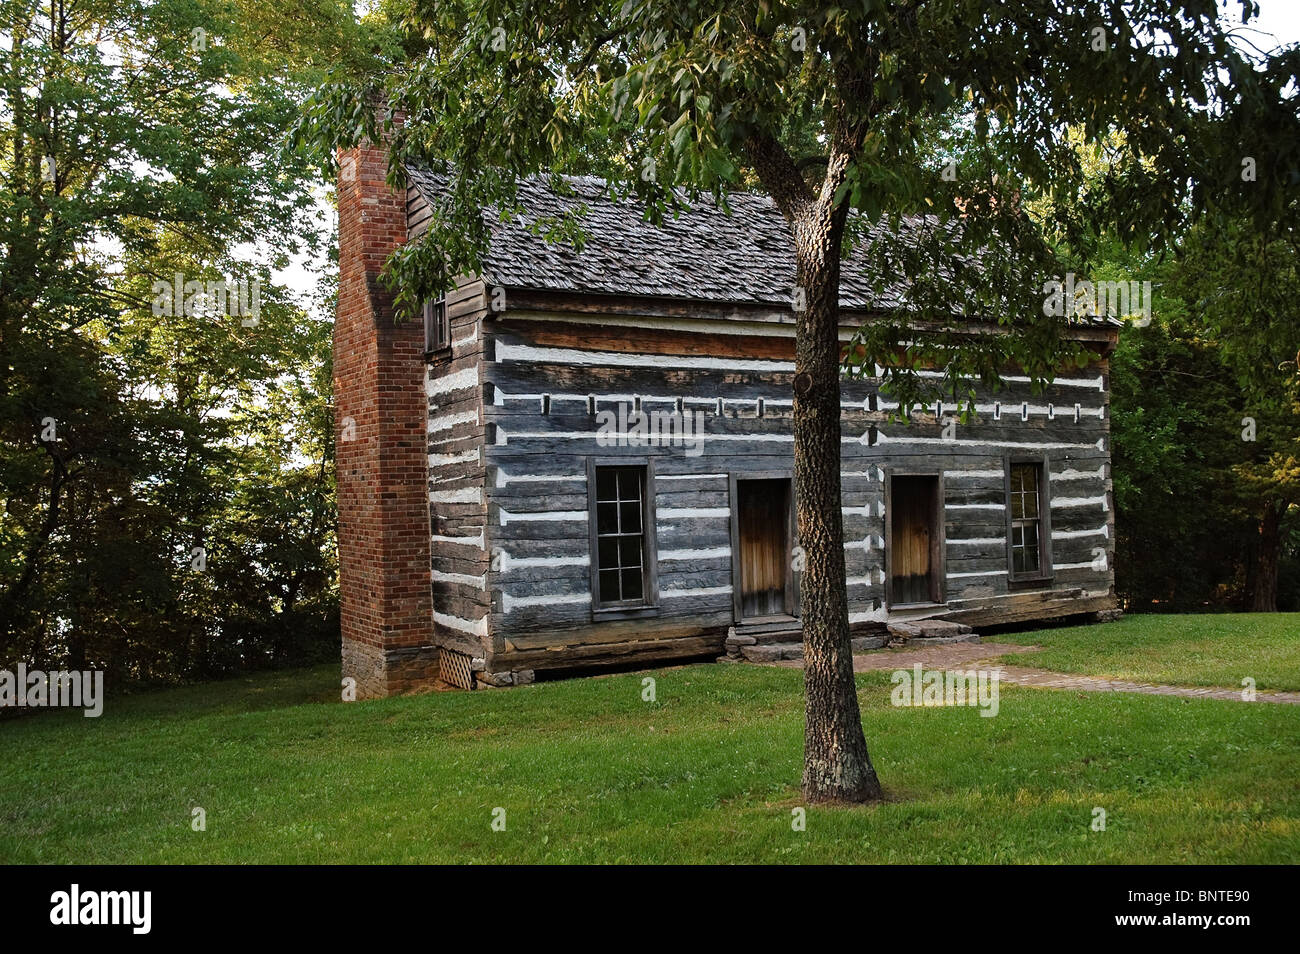 Atkinson-Griffin Log House at U.S. Army Corps of Engineers visitor center at the dam on Green River, KY. Stock Photo